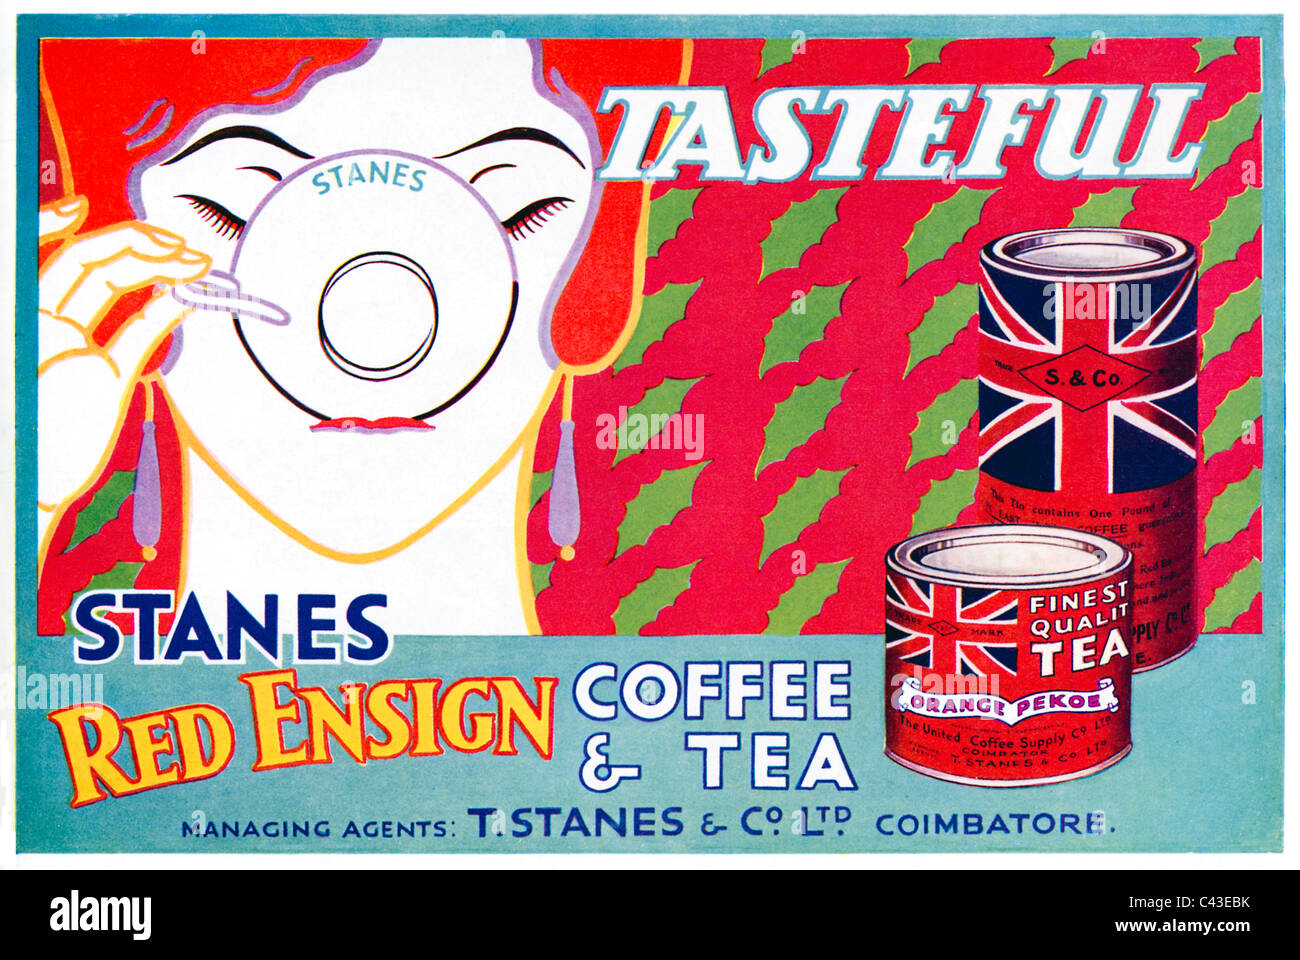 Stanes Red Ensign Tea & Coffee, 1932 advert for the merchants in the South Indian city of Coimbatore Stock Photo